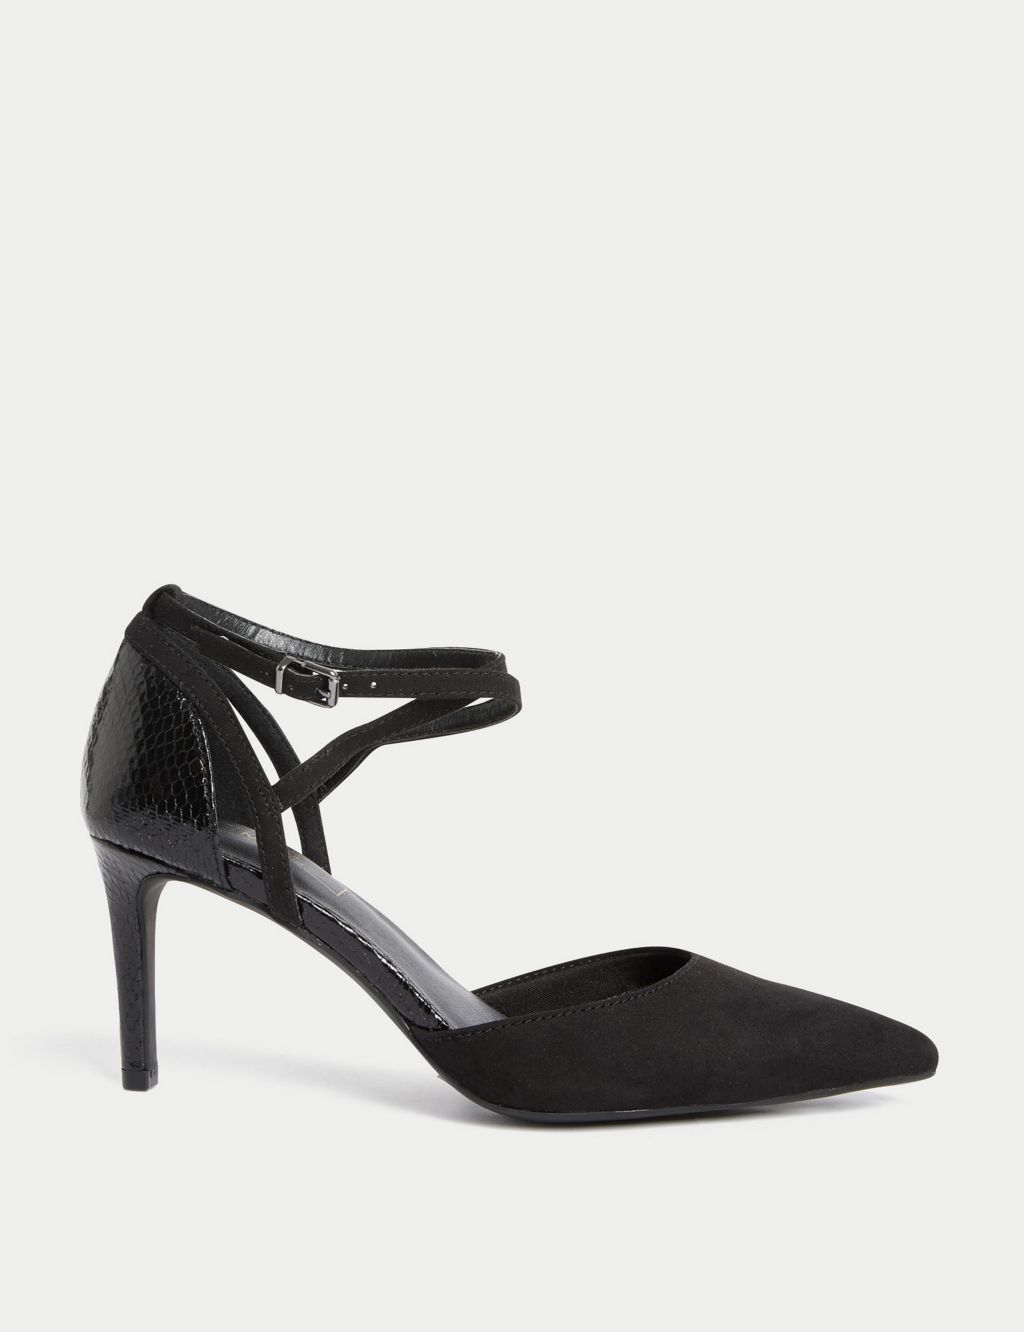 Wide Fit Stiletto Heel Court Shoes | M&S Collection | M&S